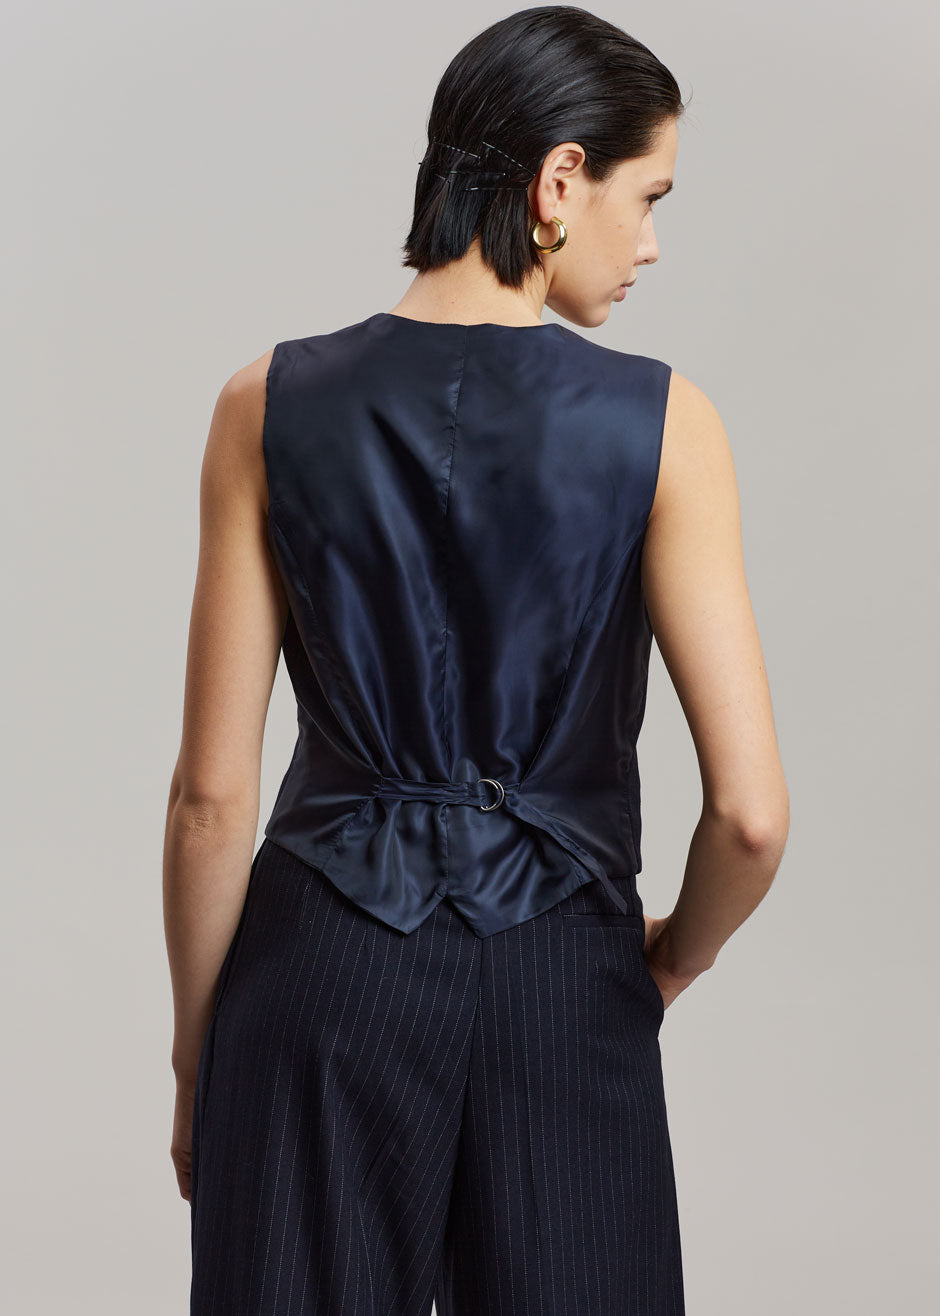 Tansy Tailored Vest - Navy Pinstripe - 11